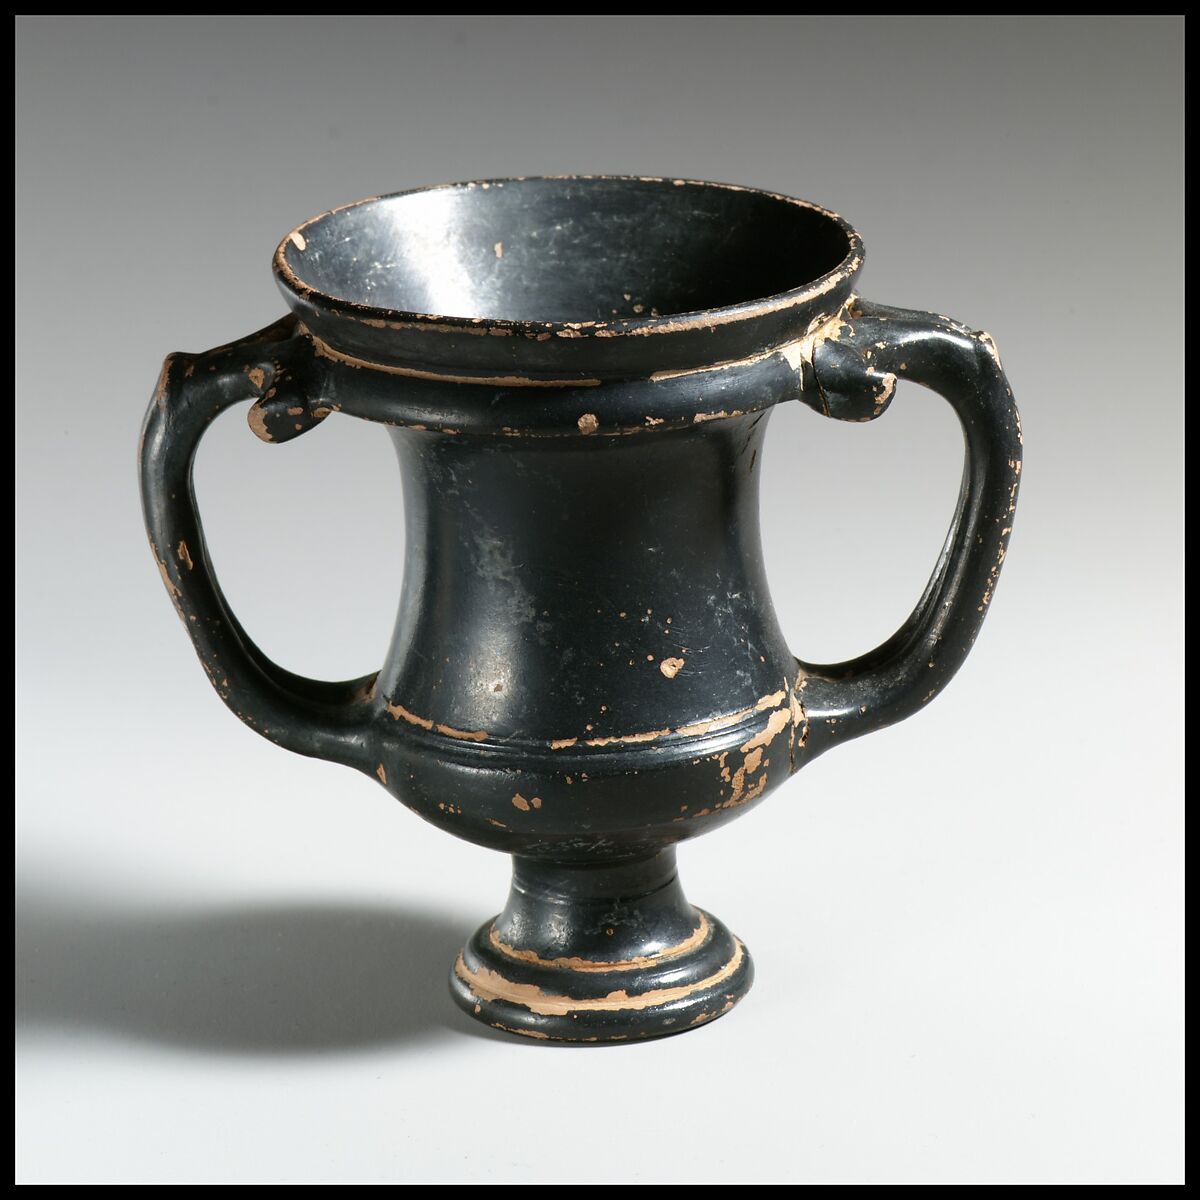 Terracotta kantharos (drinking cup), Attributed to the Group of Vatican G.116, Terracotta, Etruscan 